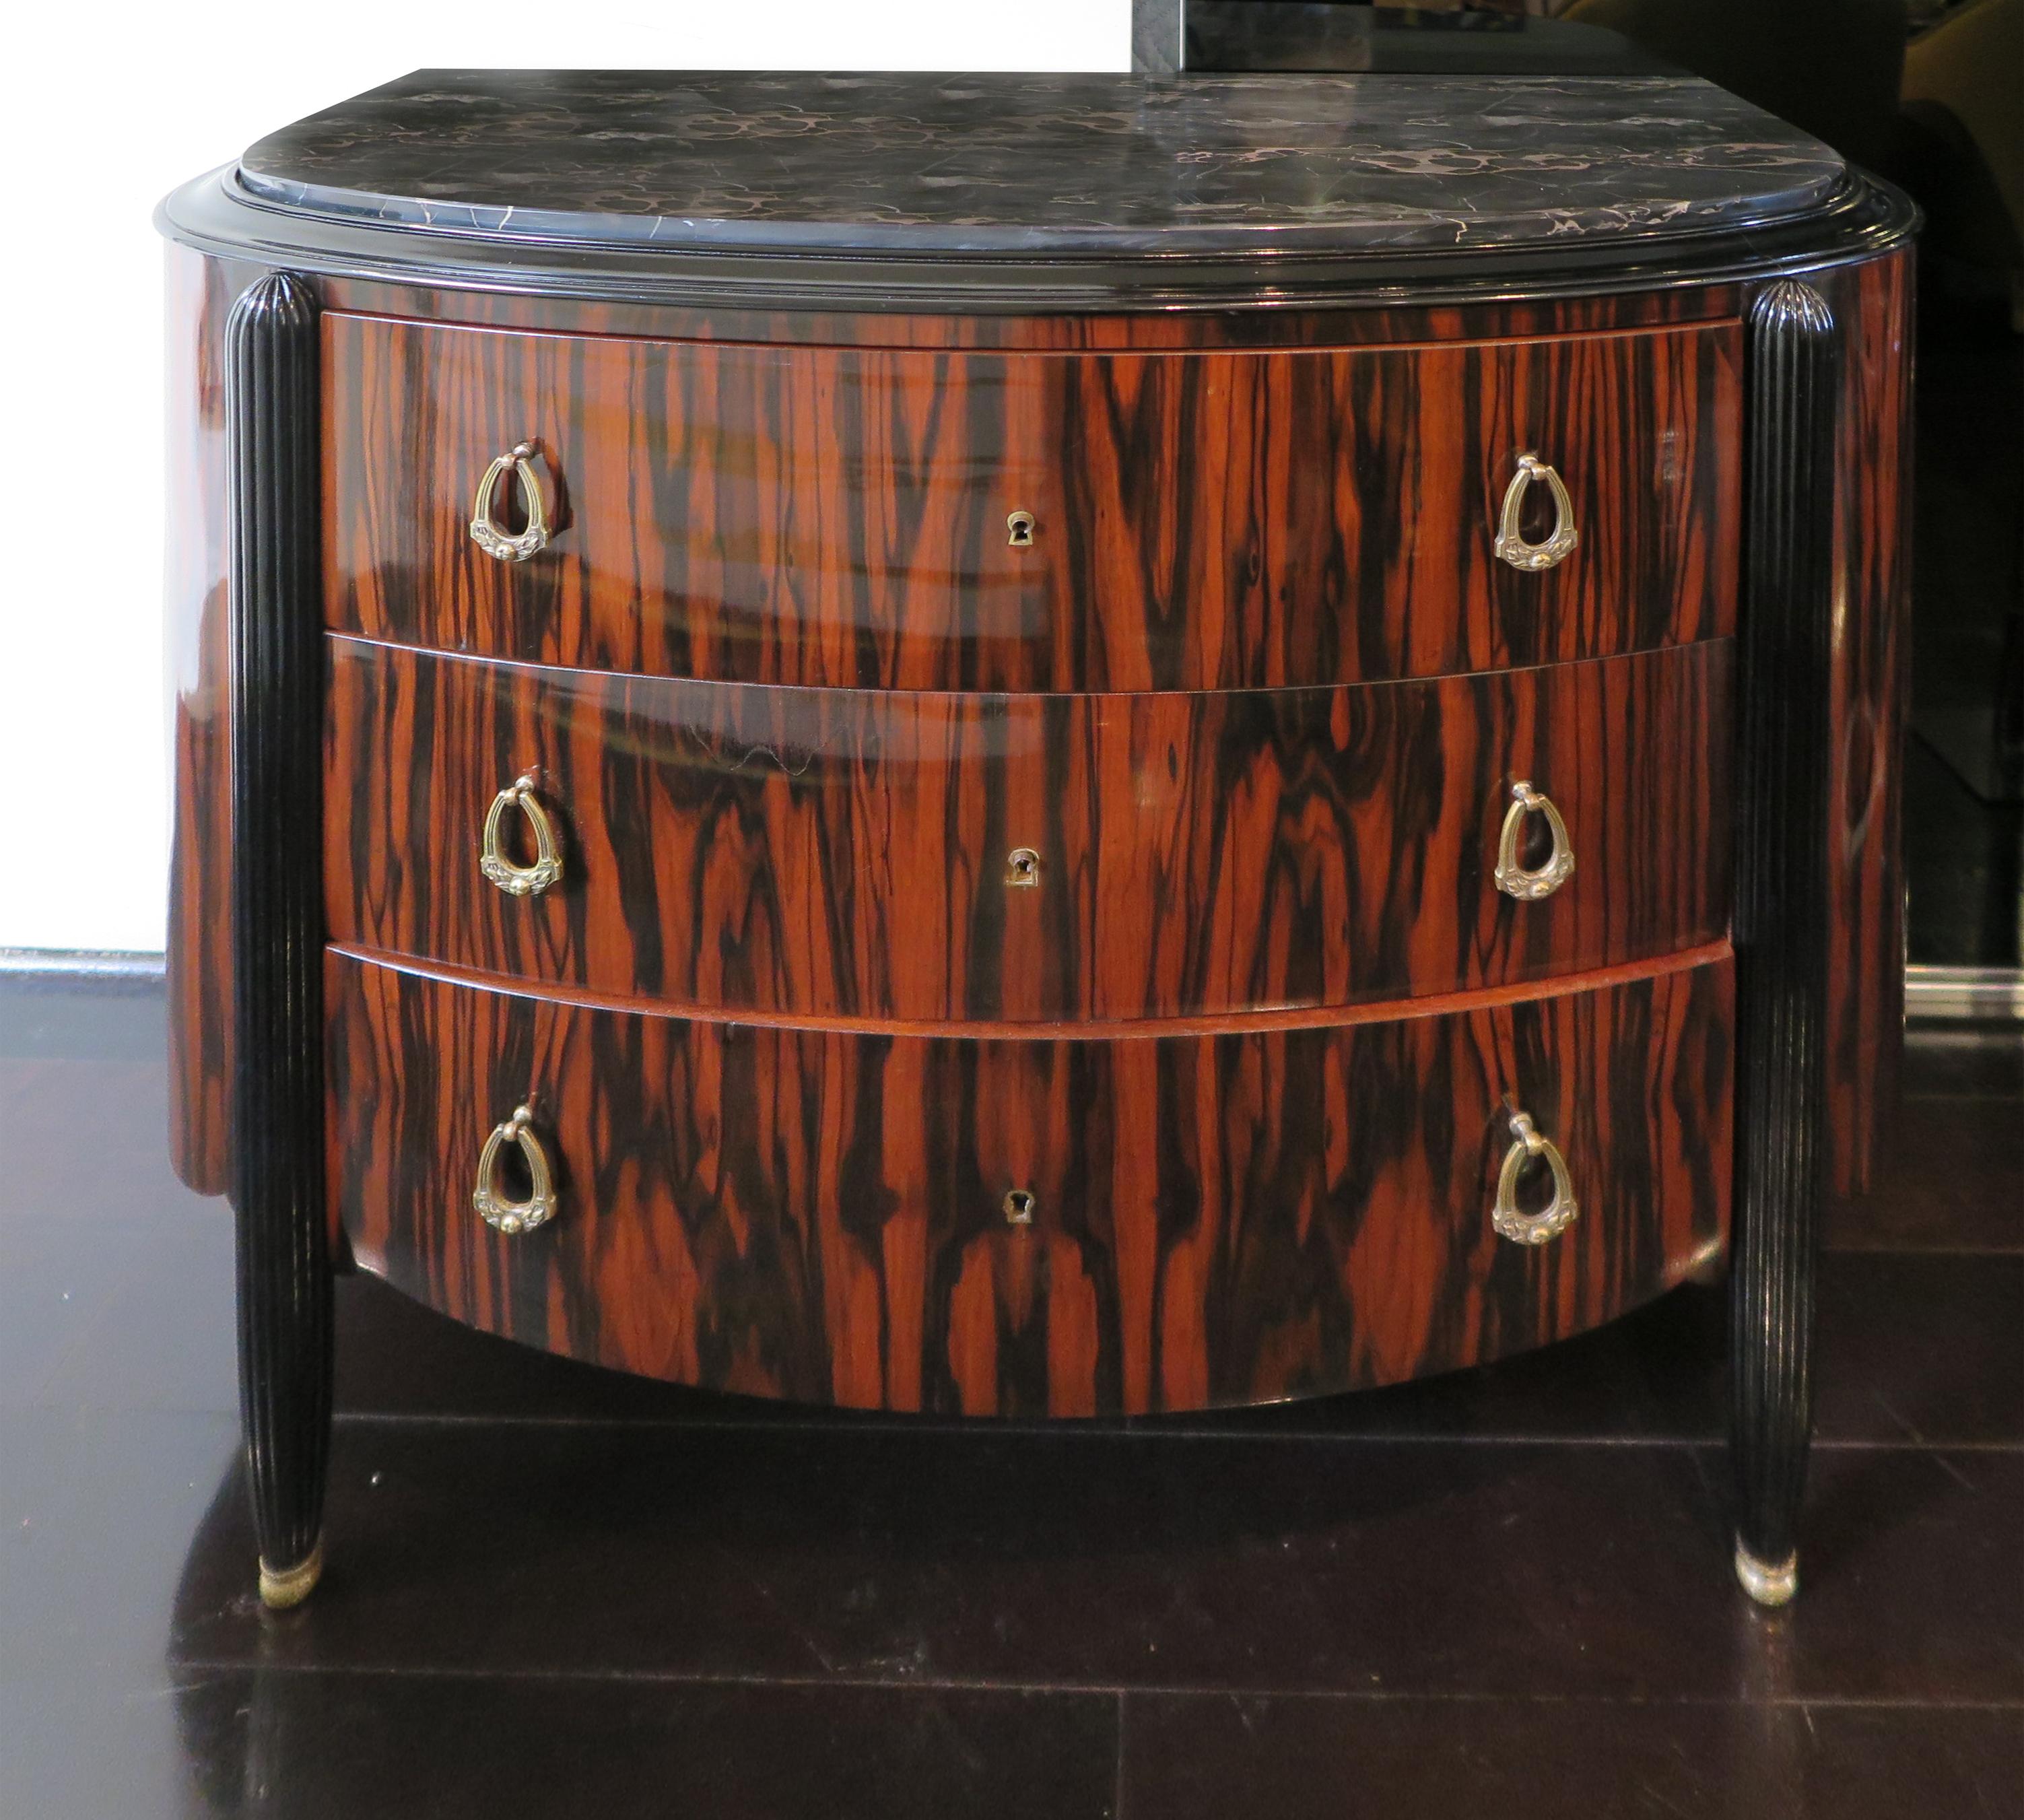 This stunning French Art Deco chest of drawers features a Macassar Ebony body and black lacquer ribbed legs. The top showcases original black marble with white veining and the bottom features a delicate scalloped detail. Attributed to Michel Dufet,